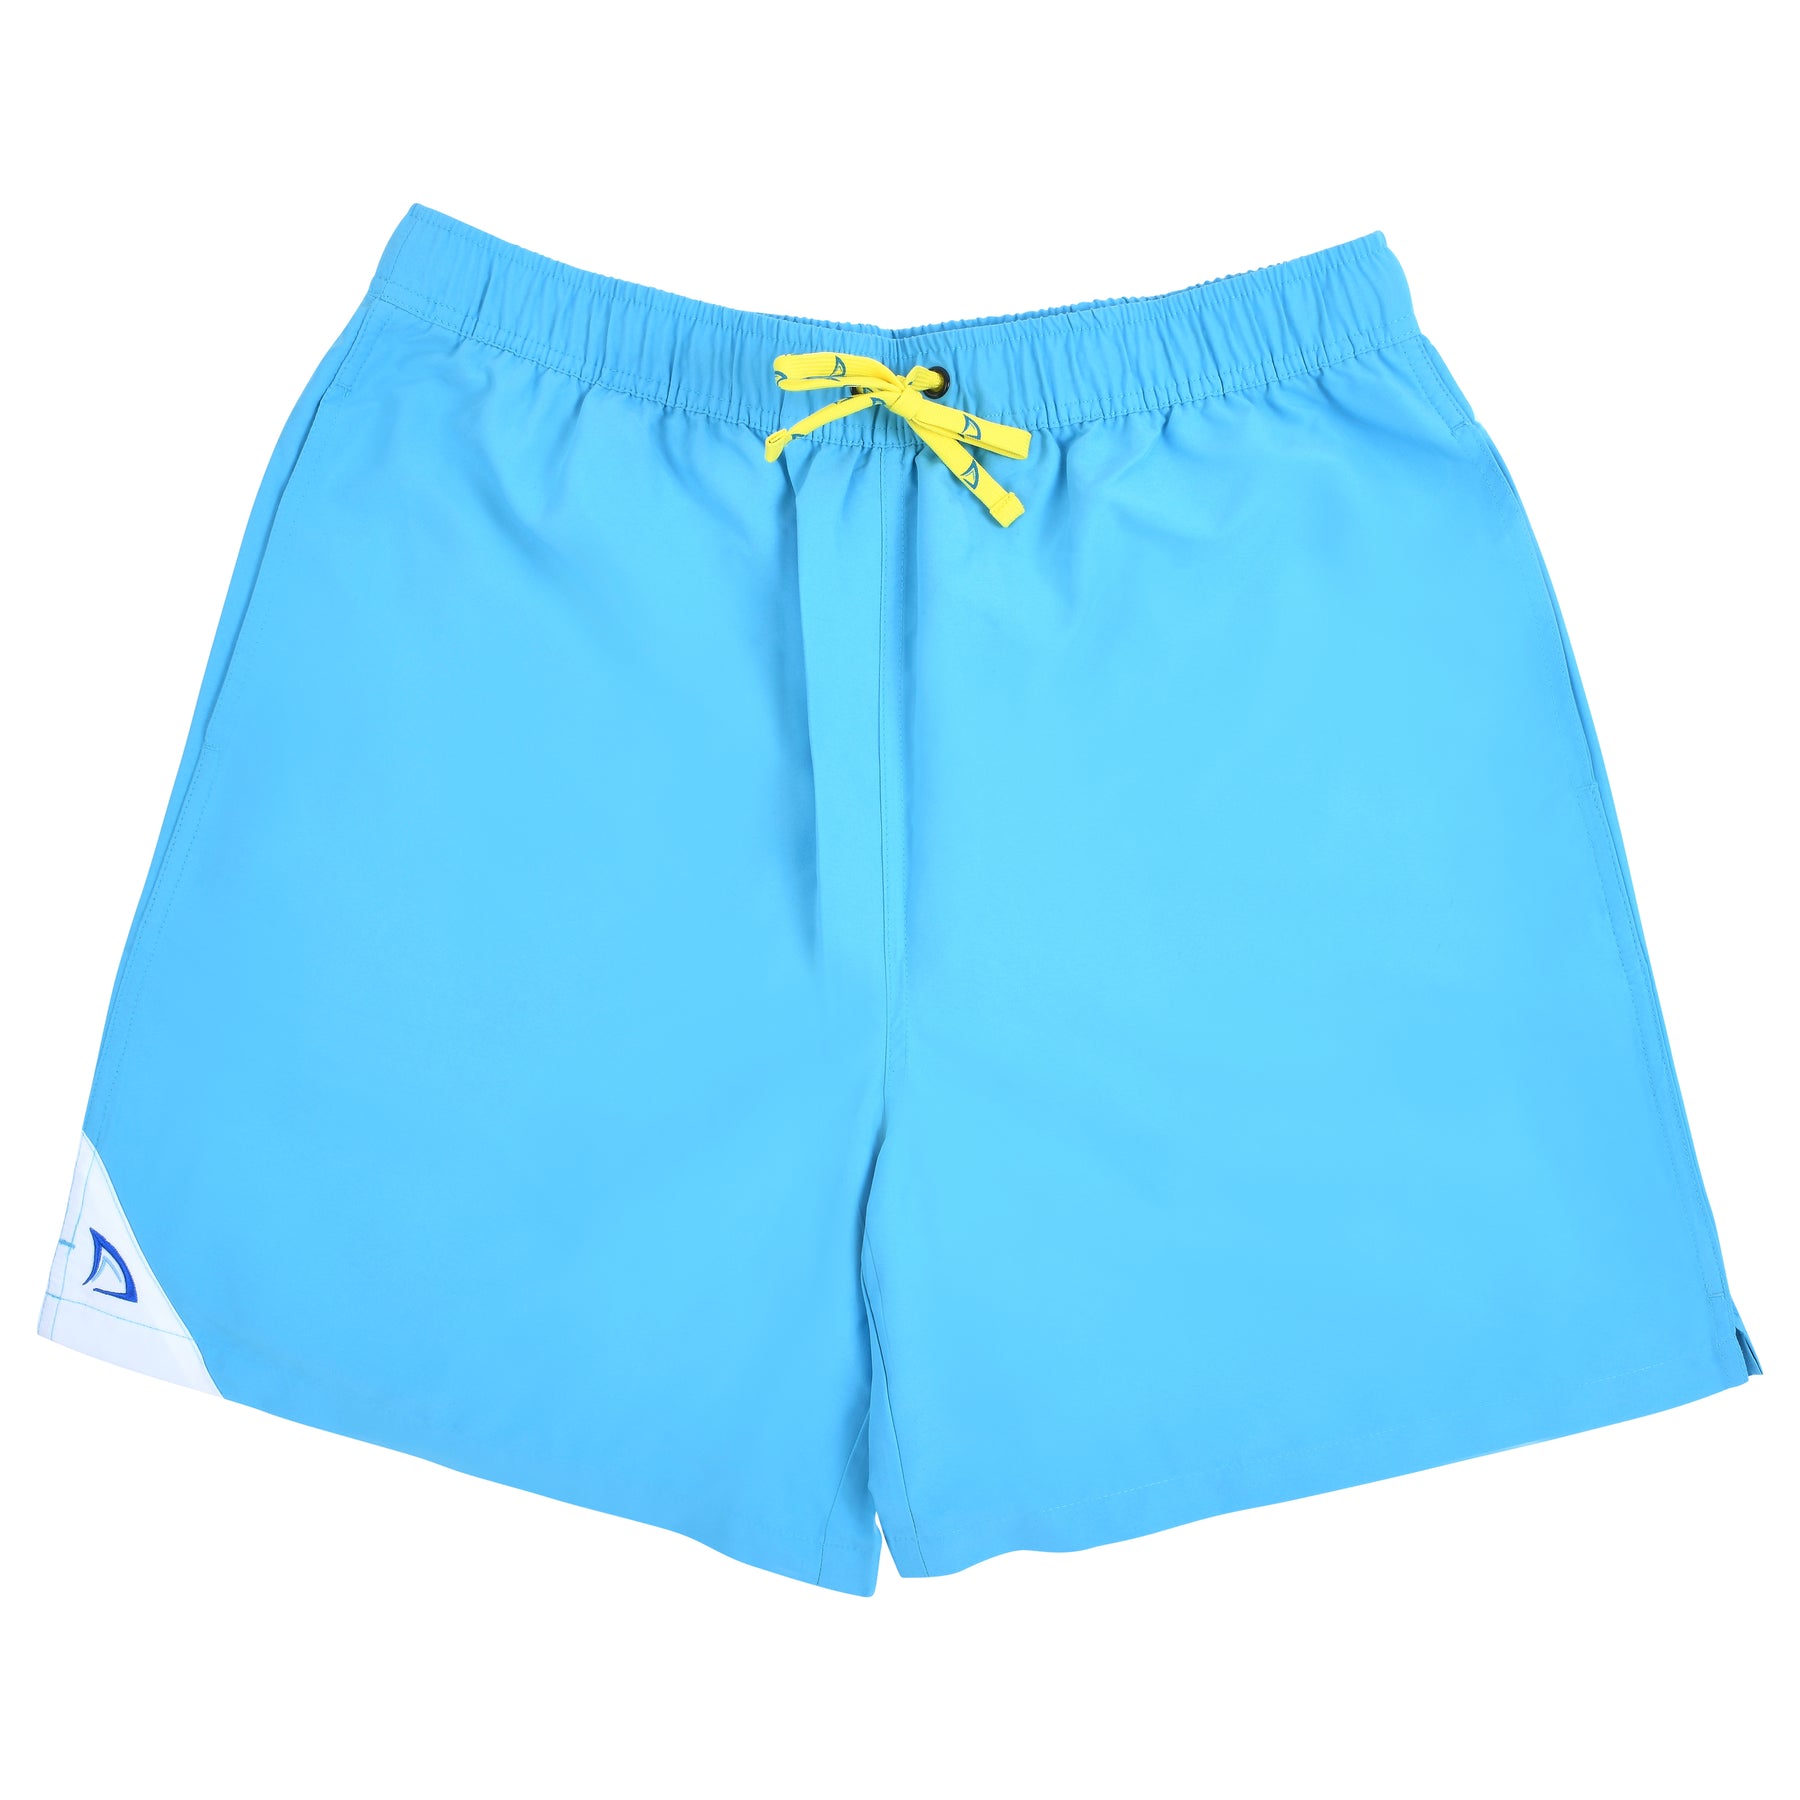 Mountain High Outfitters Men's Manfish Swim Trunk